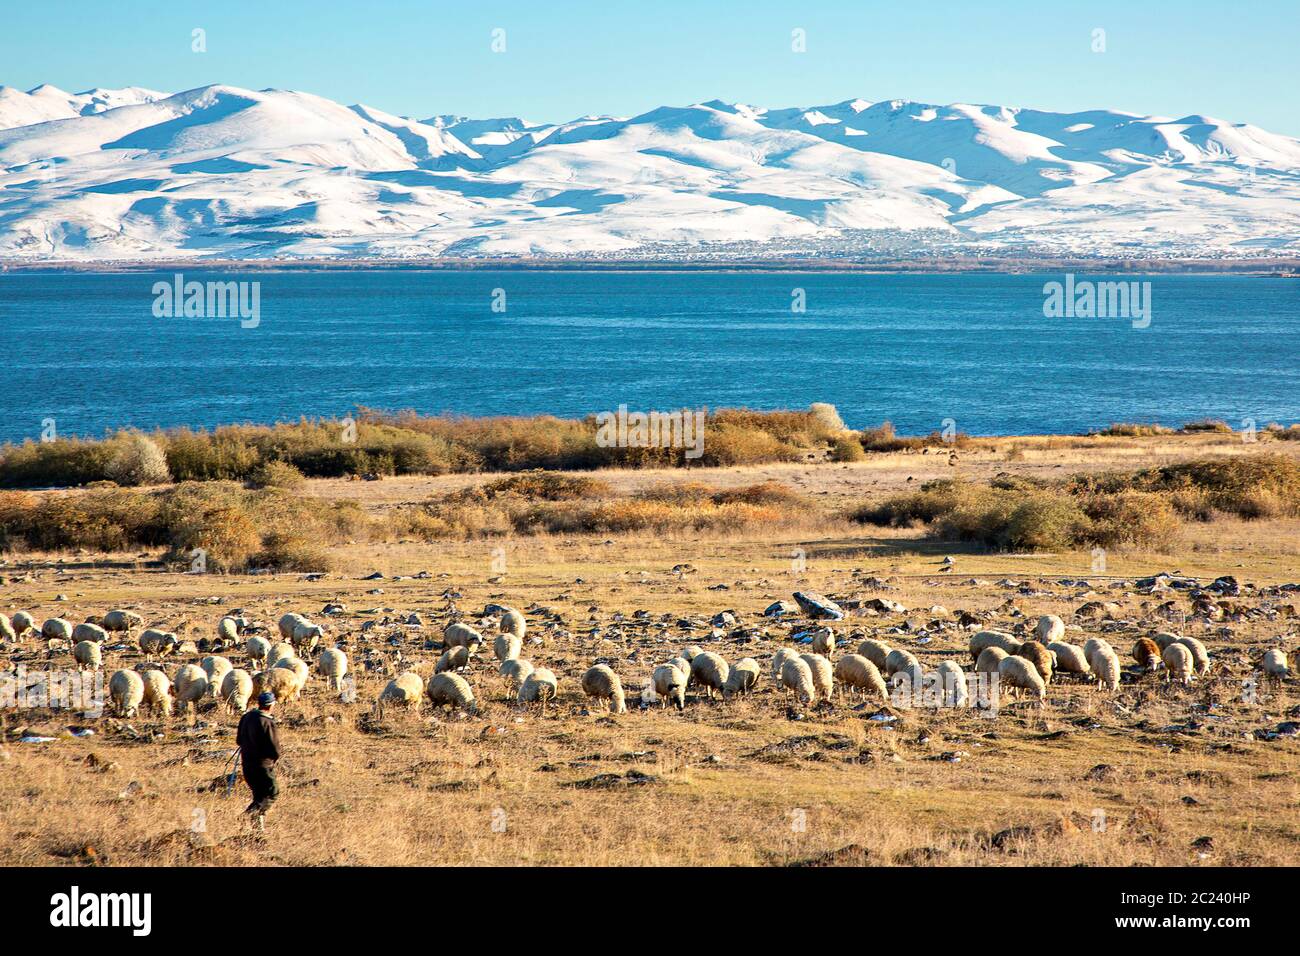 Herd of sheep with the Lake Sevan in the background in Armenia Stock Photo